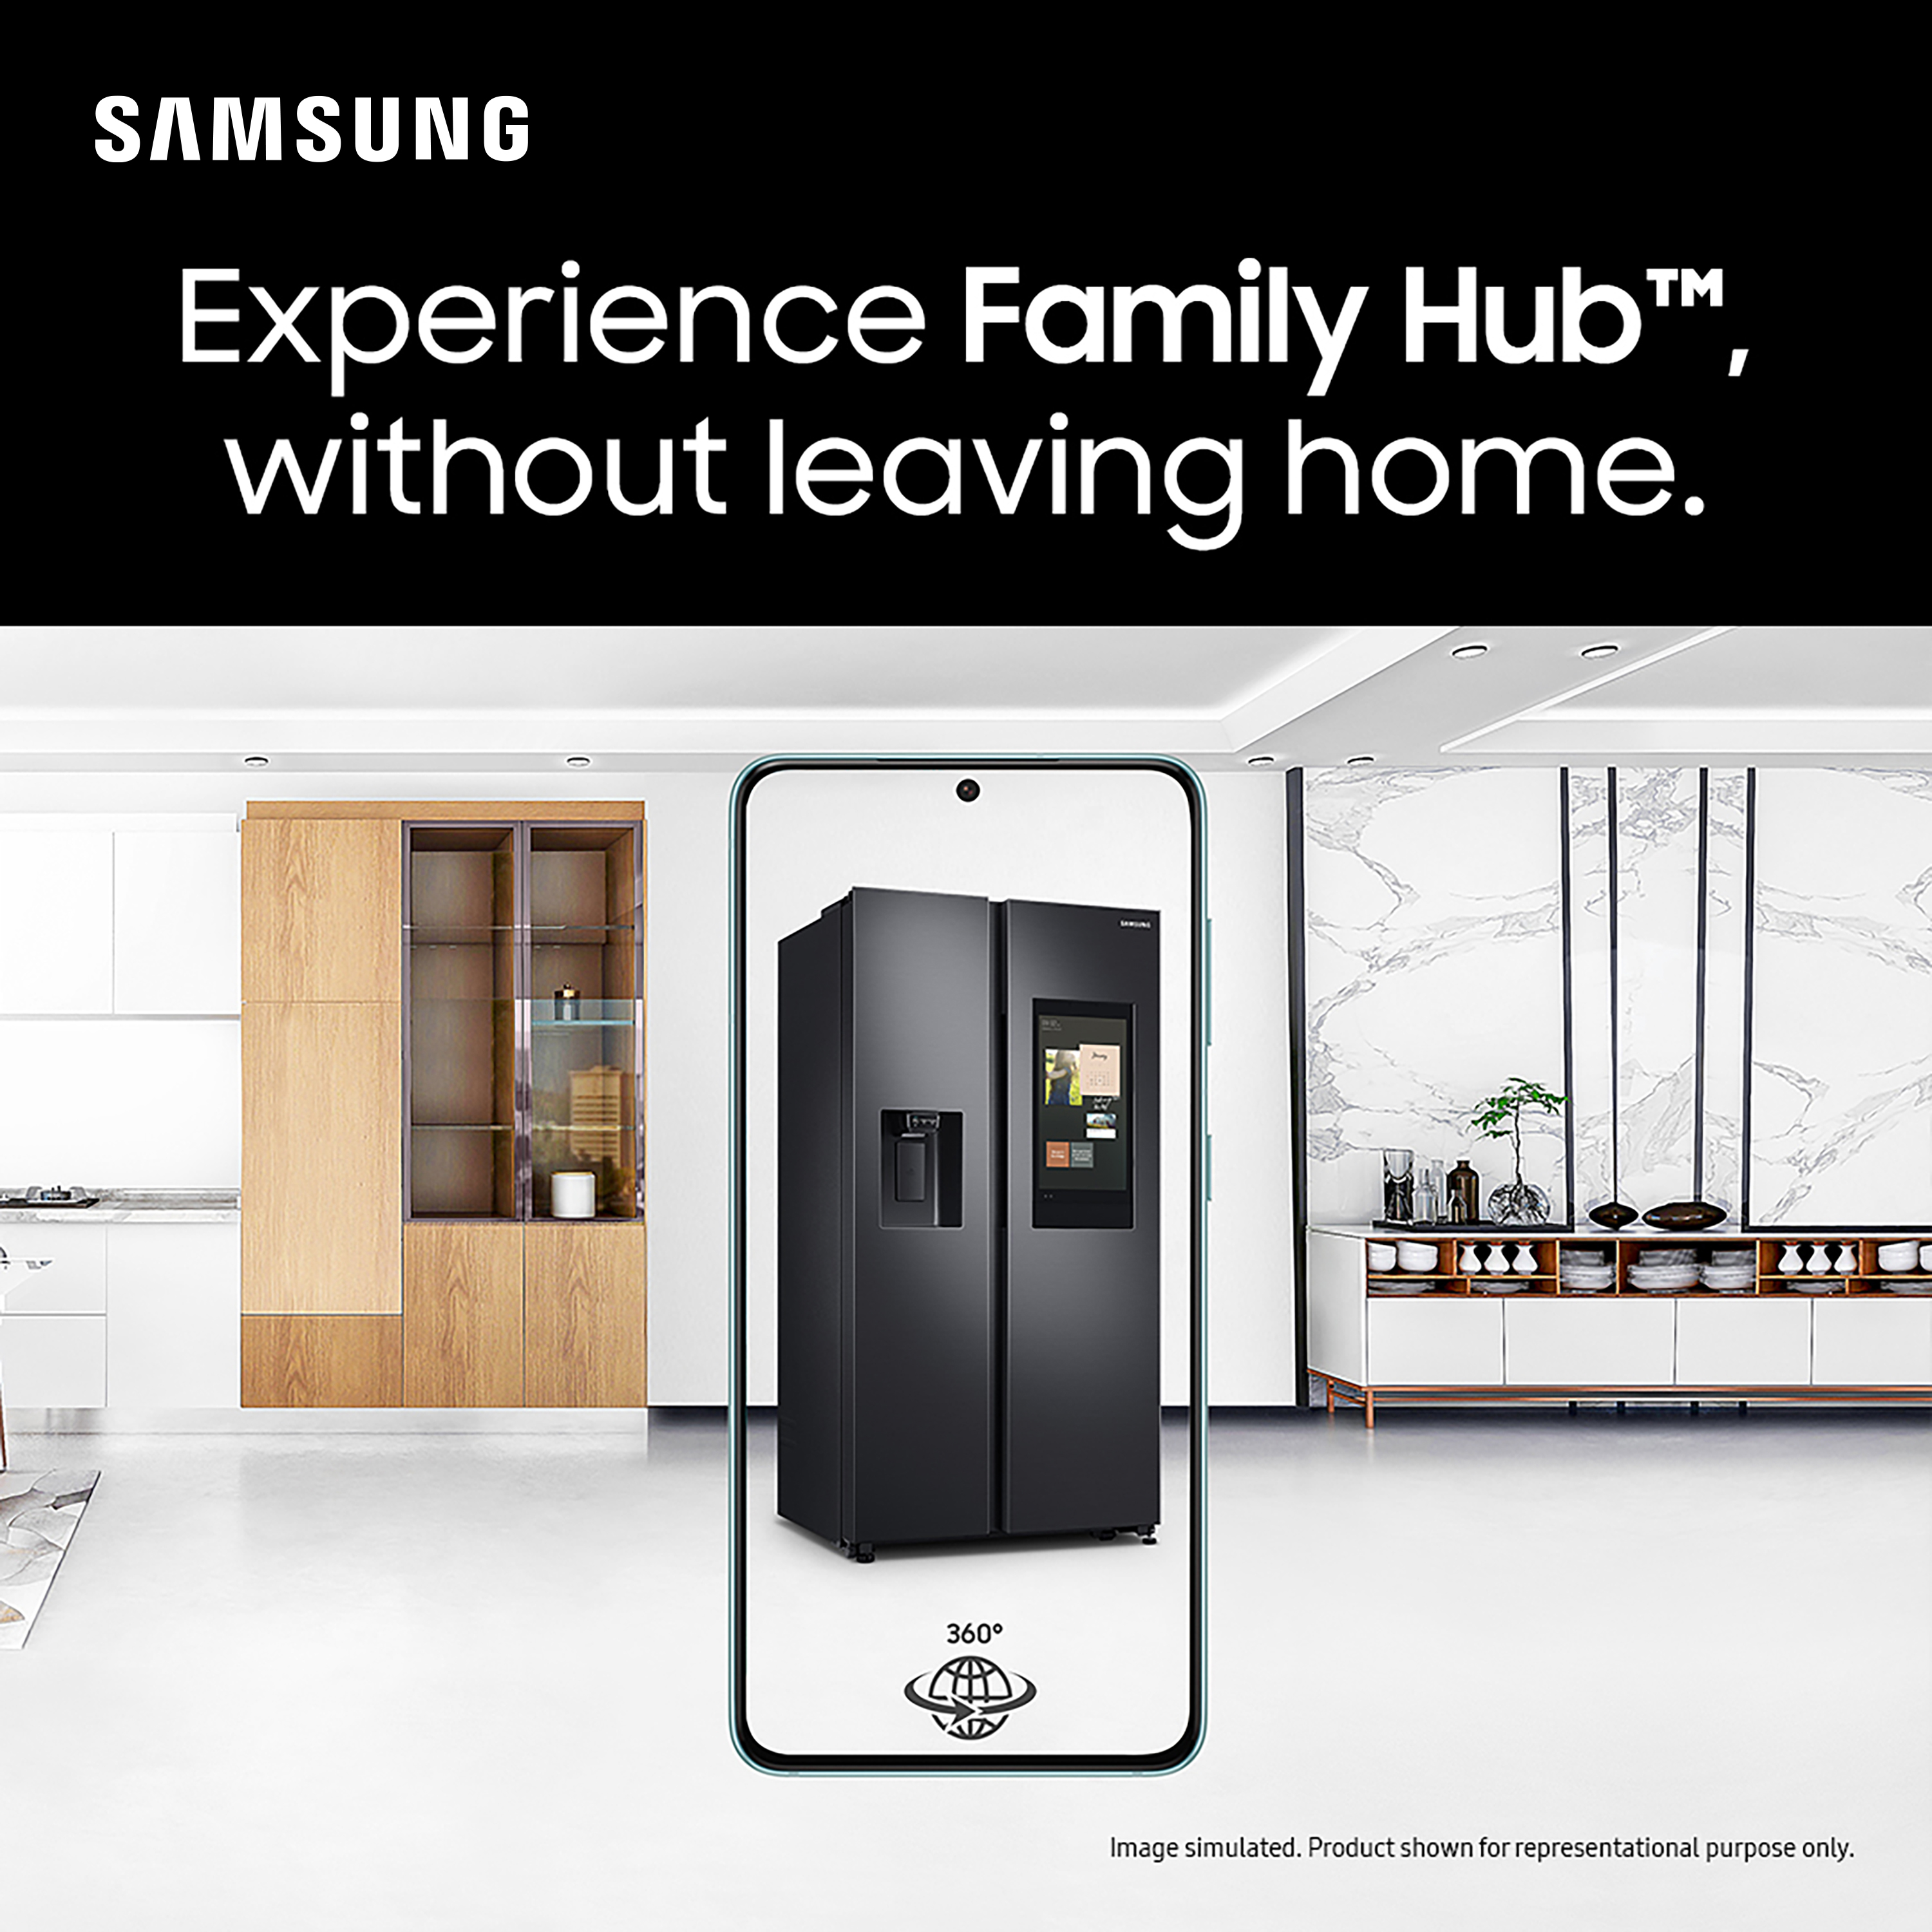 Get a Life-like Virtual Shopping Experience from Your Home with Augmented Reality Demo for Samsung’s Flagship Refrigerator & TV